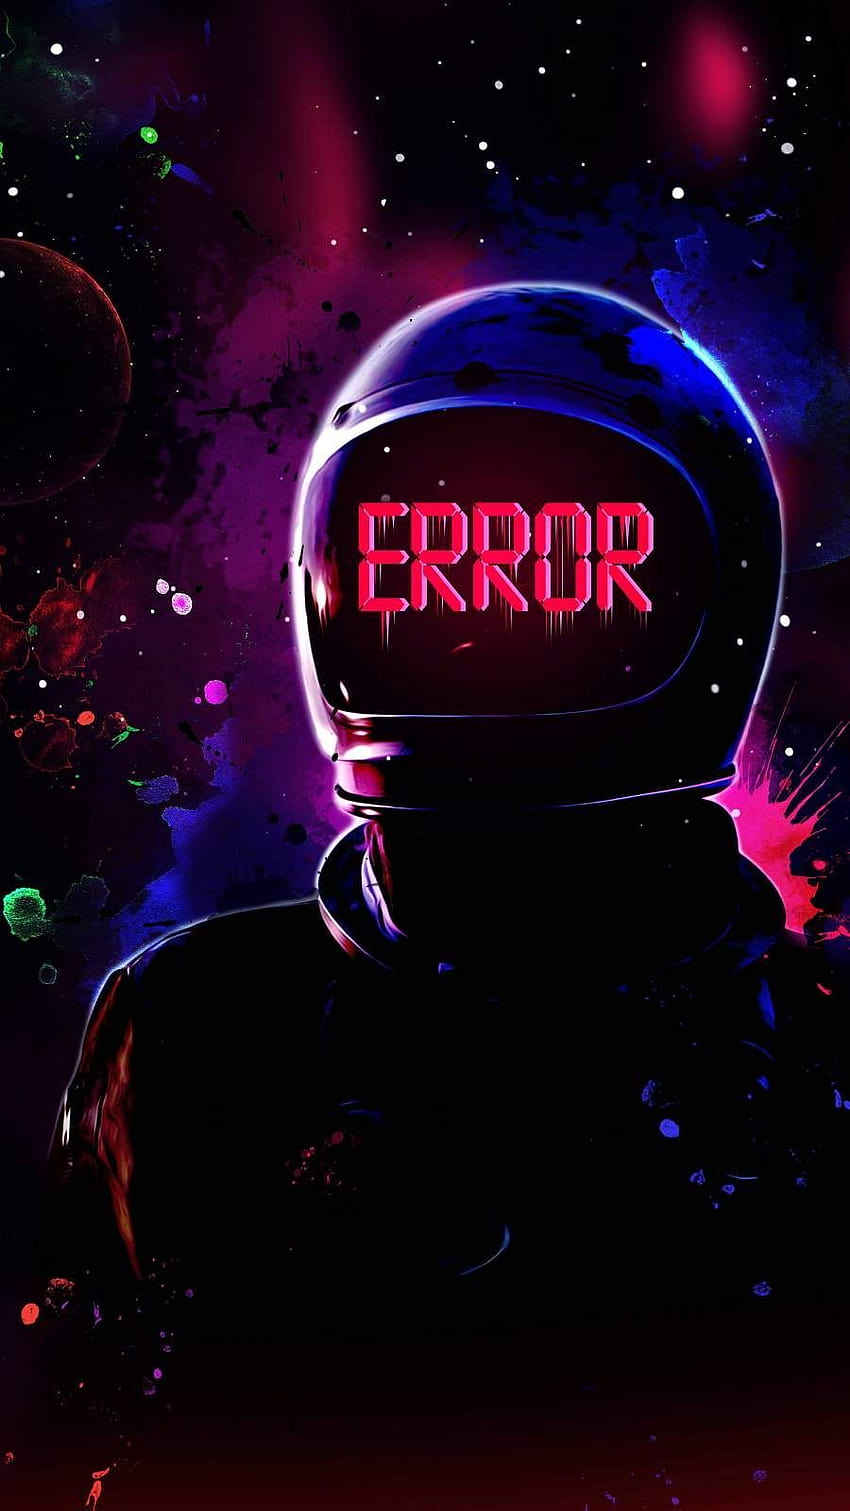 Download Error Gas Mask Hacking Android Background Wallpaper | Wallpapers .com